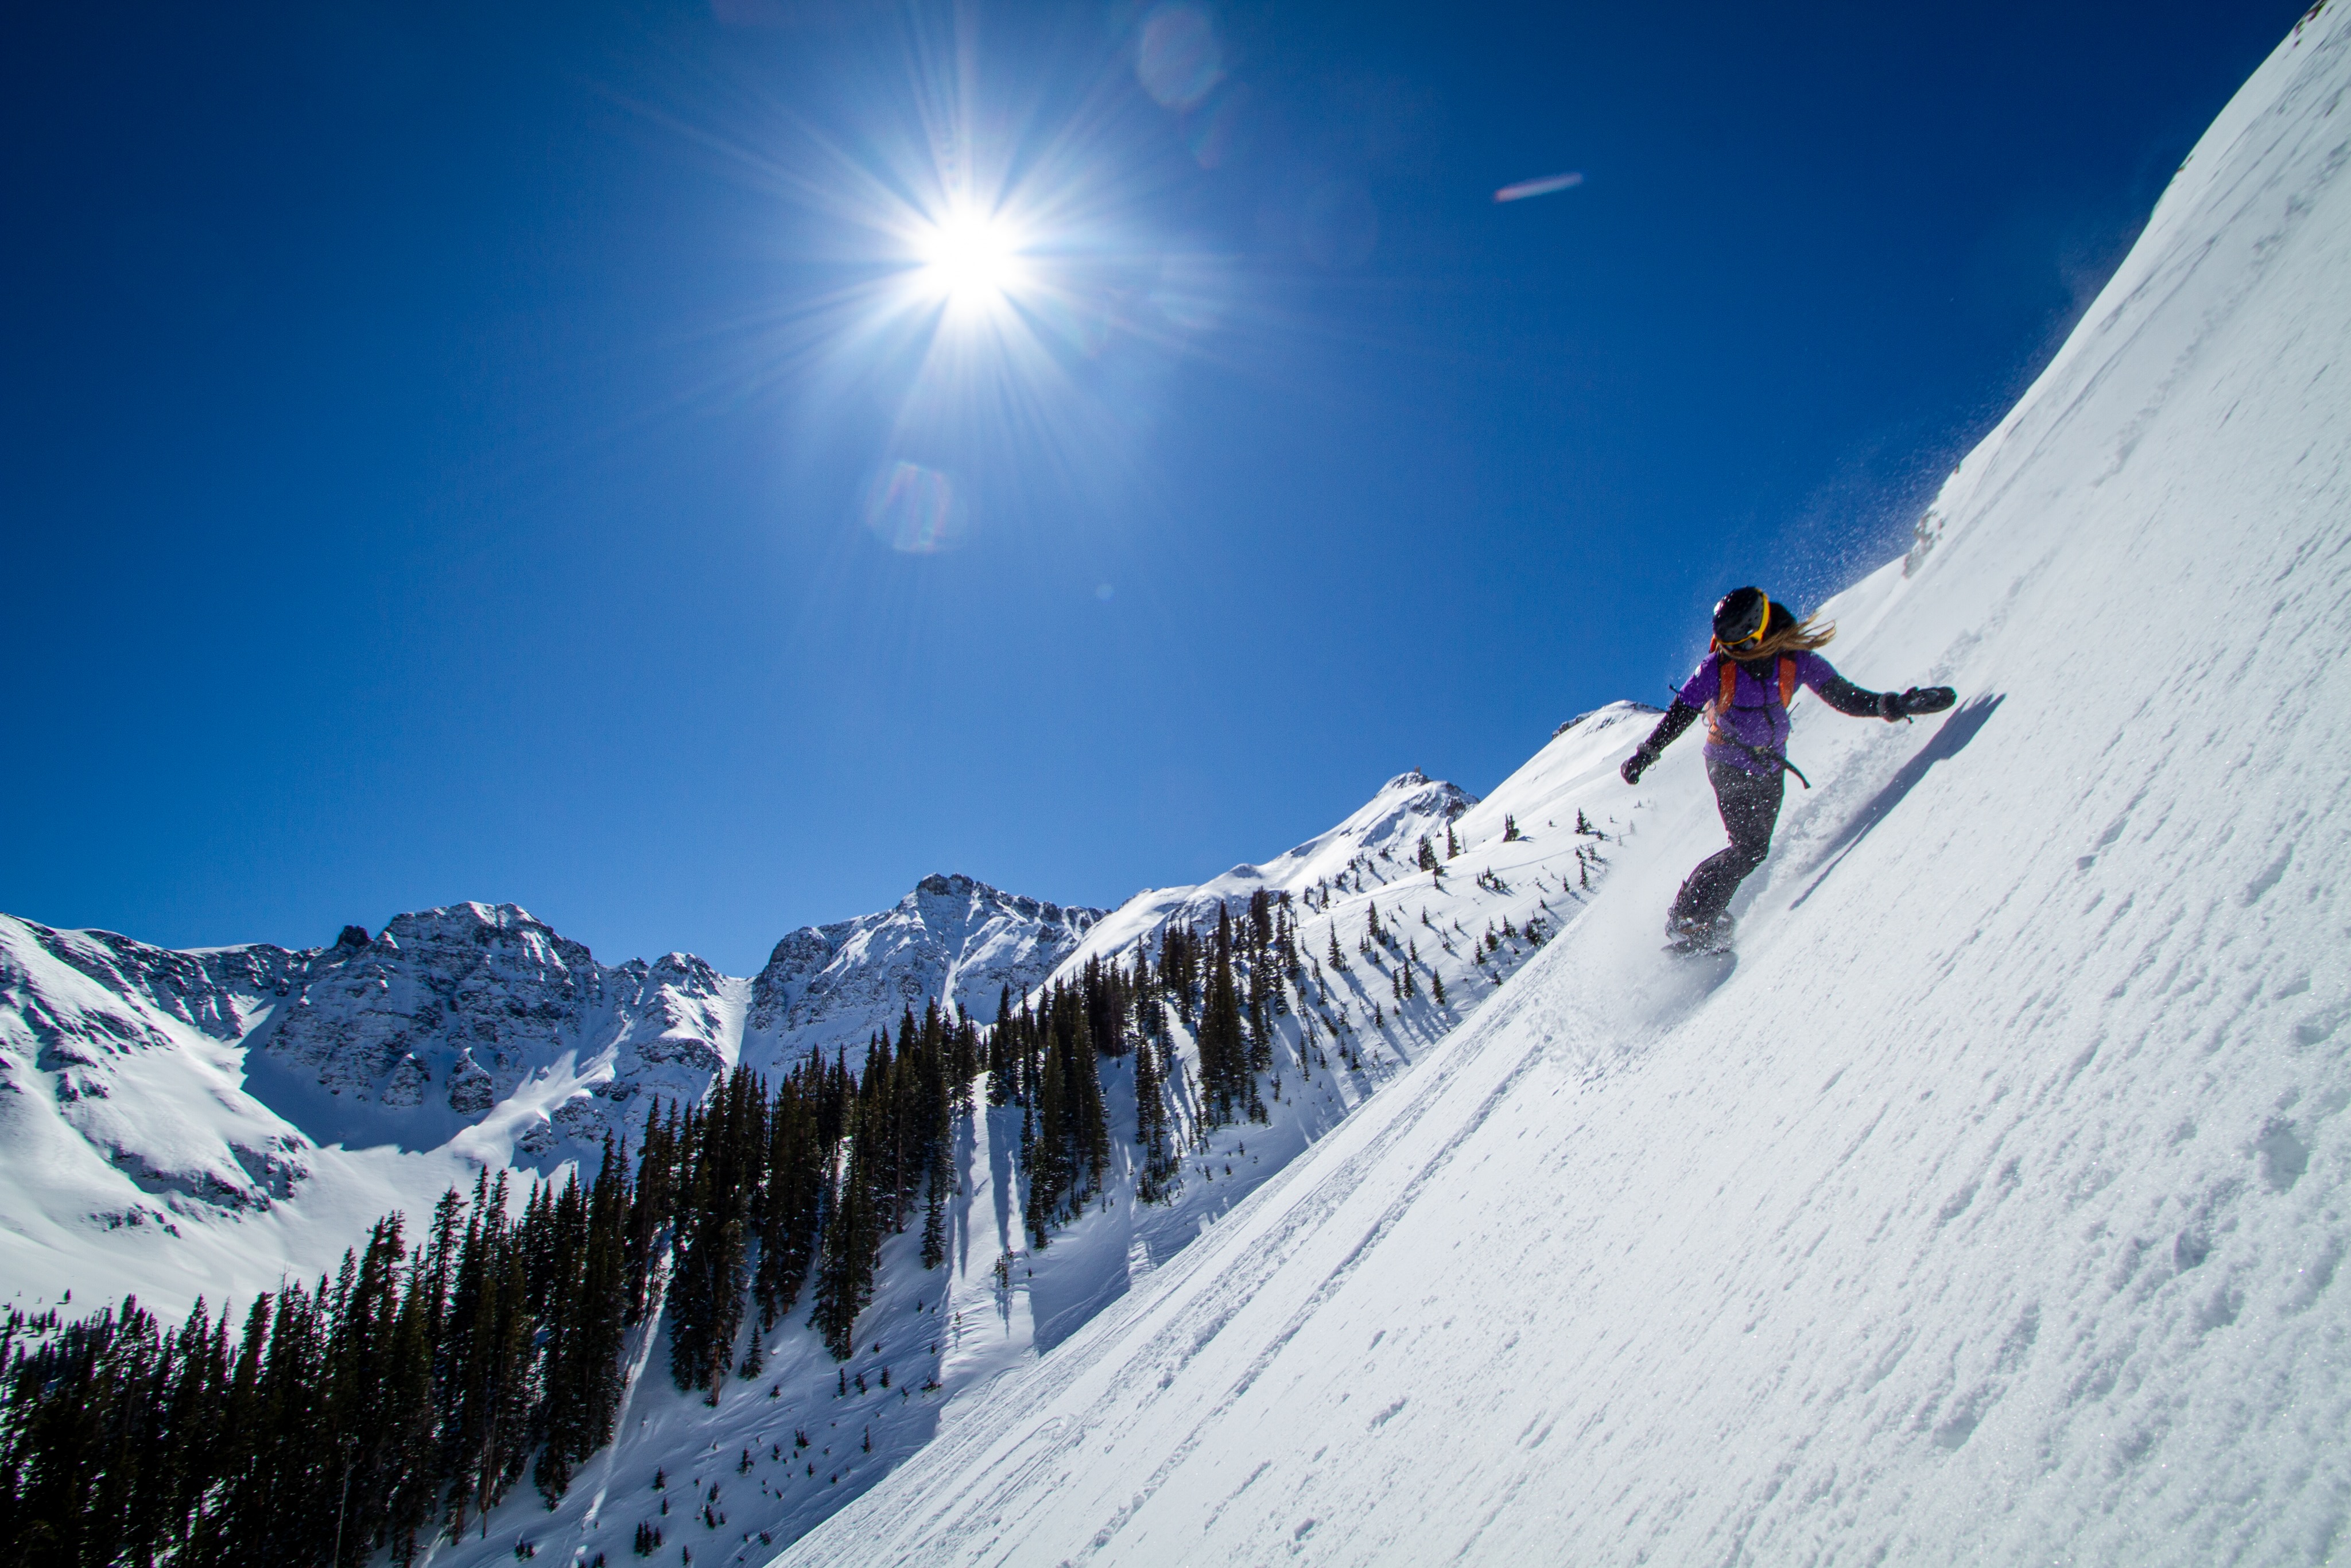 Silverton-Mountain-co-founder-Jen-Brill-snowboards-down-a-steep-face-at-her-home mountain-in-Colorado.
